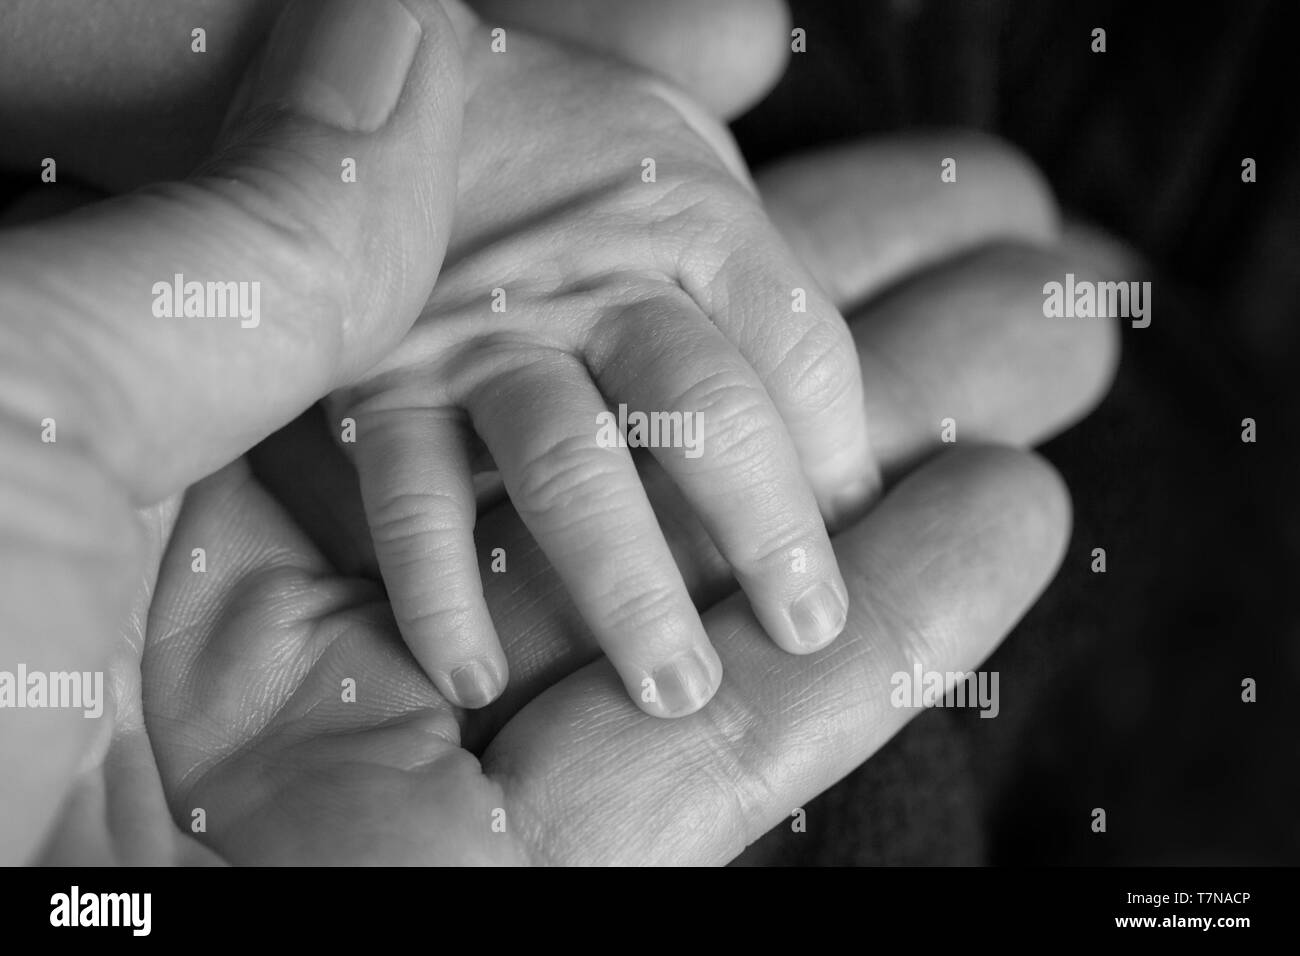 Father holding a newborn baby hand in his. Black and white child hand closeup into parent hands together. Stock Photo